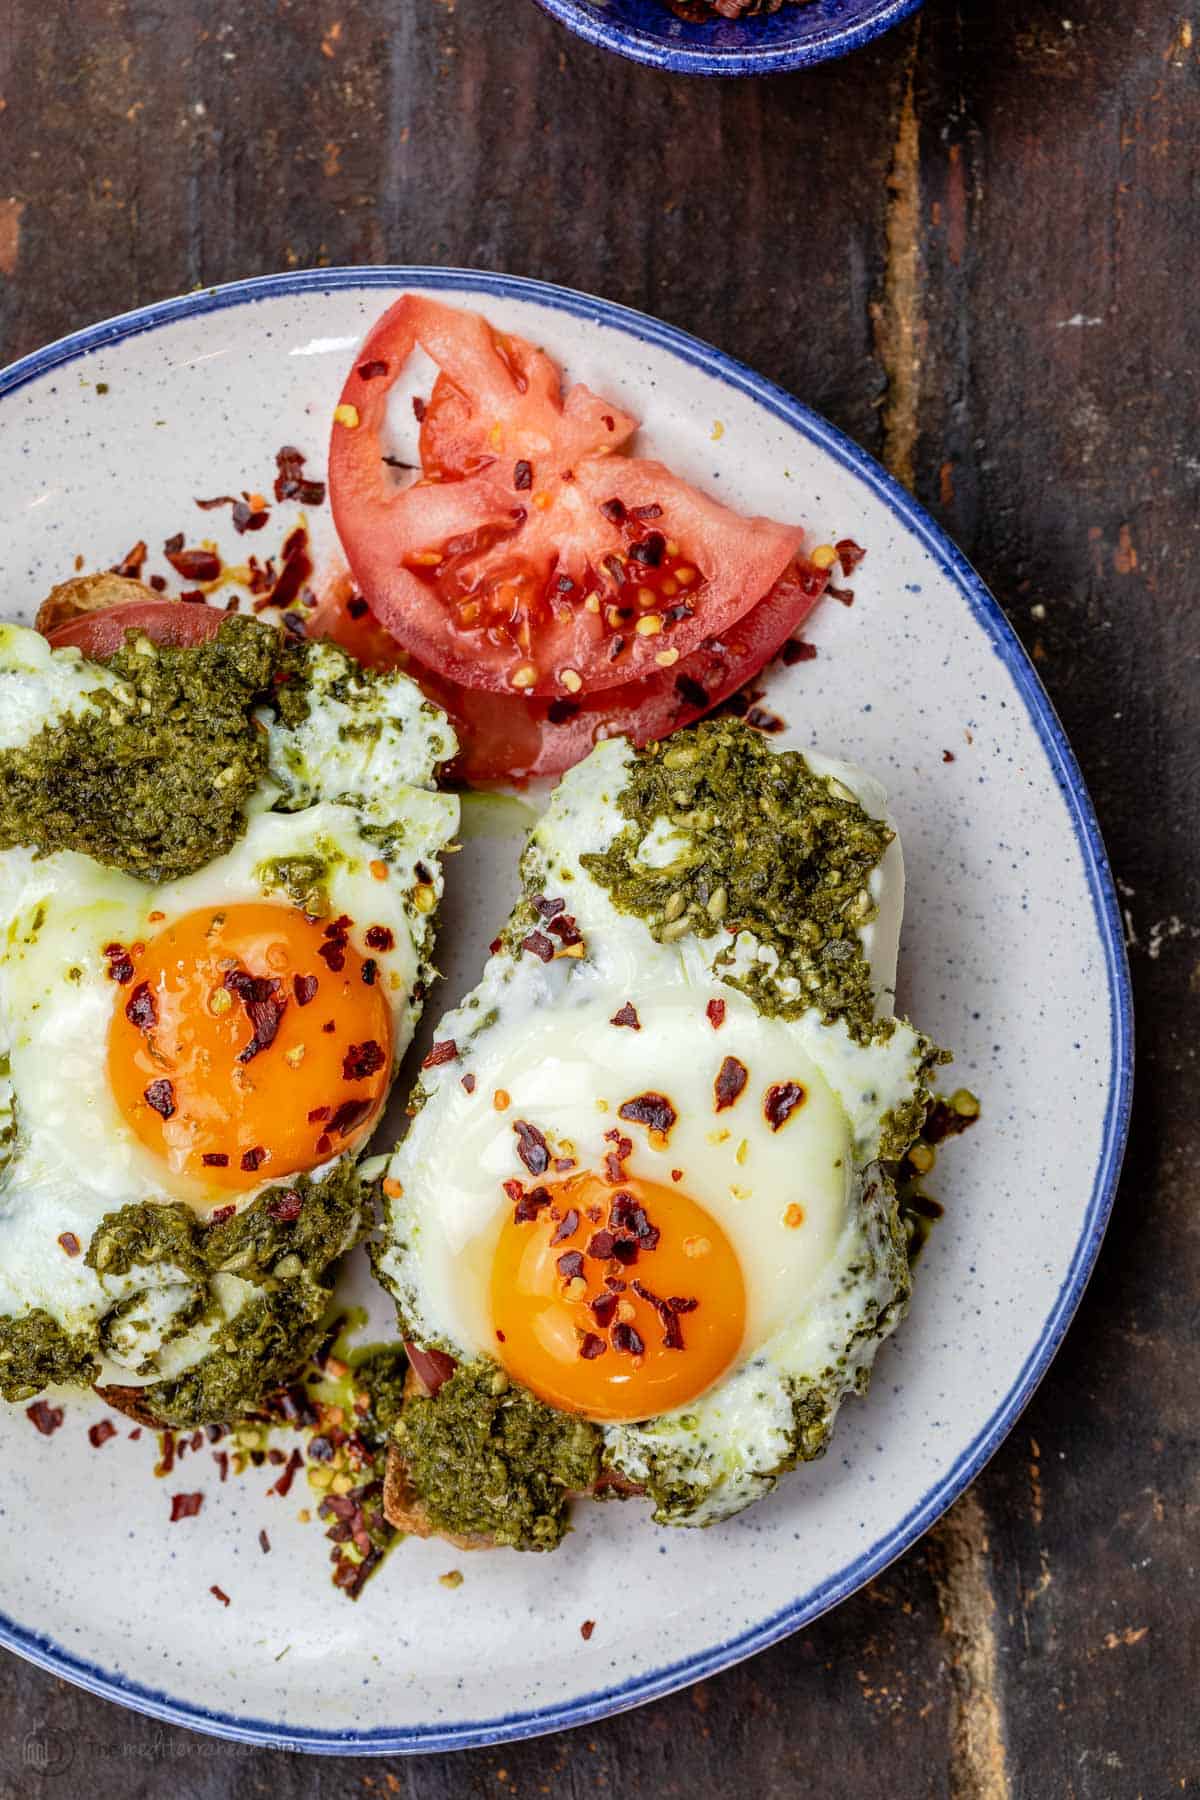 Eggs with pesto on a plate